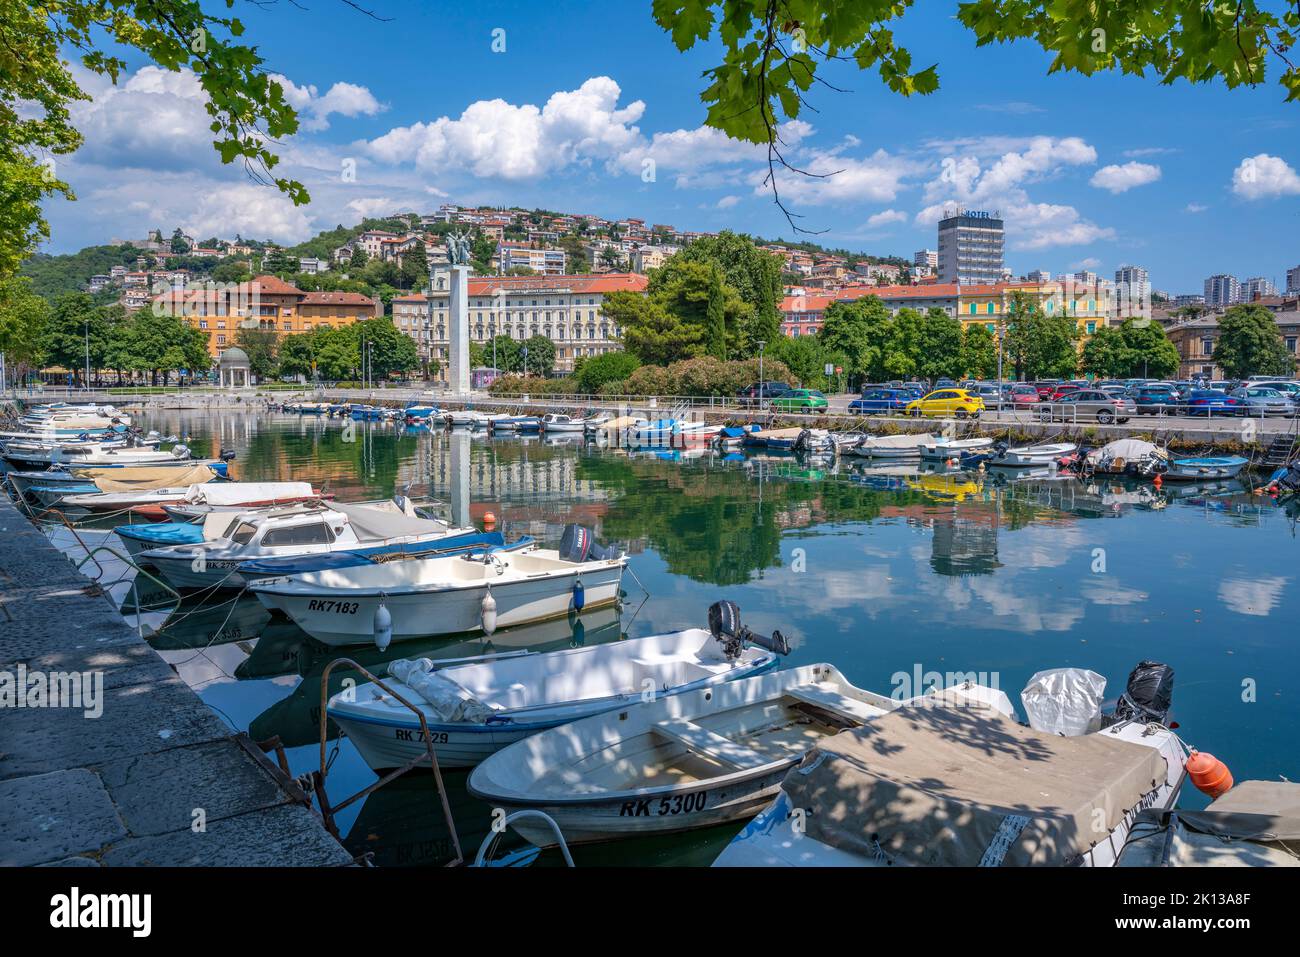 View of Mrtvi Canal and Monument of Liberation in old town centre, Rijeka, Kvarner Bay, Croatia, Europe Stock Photo